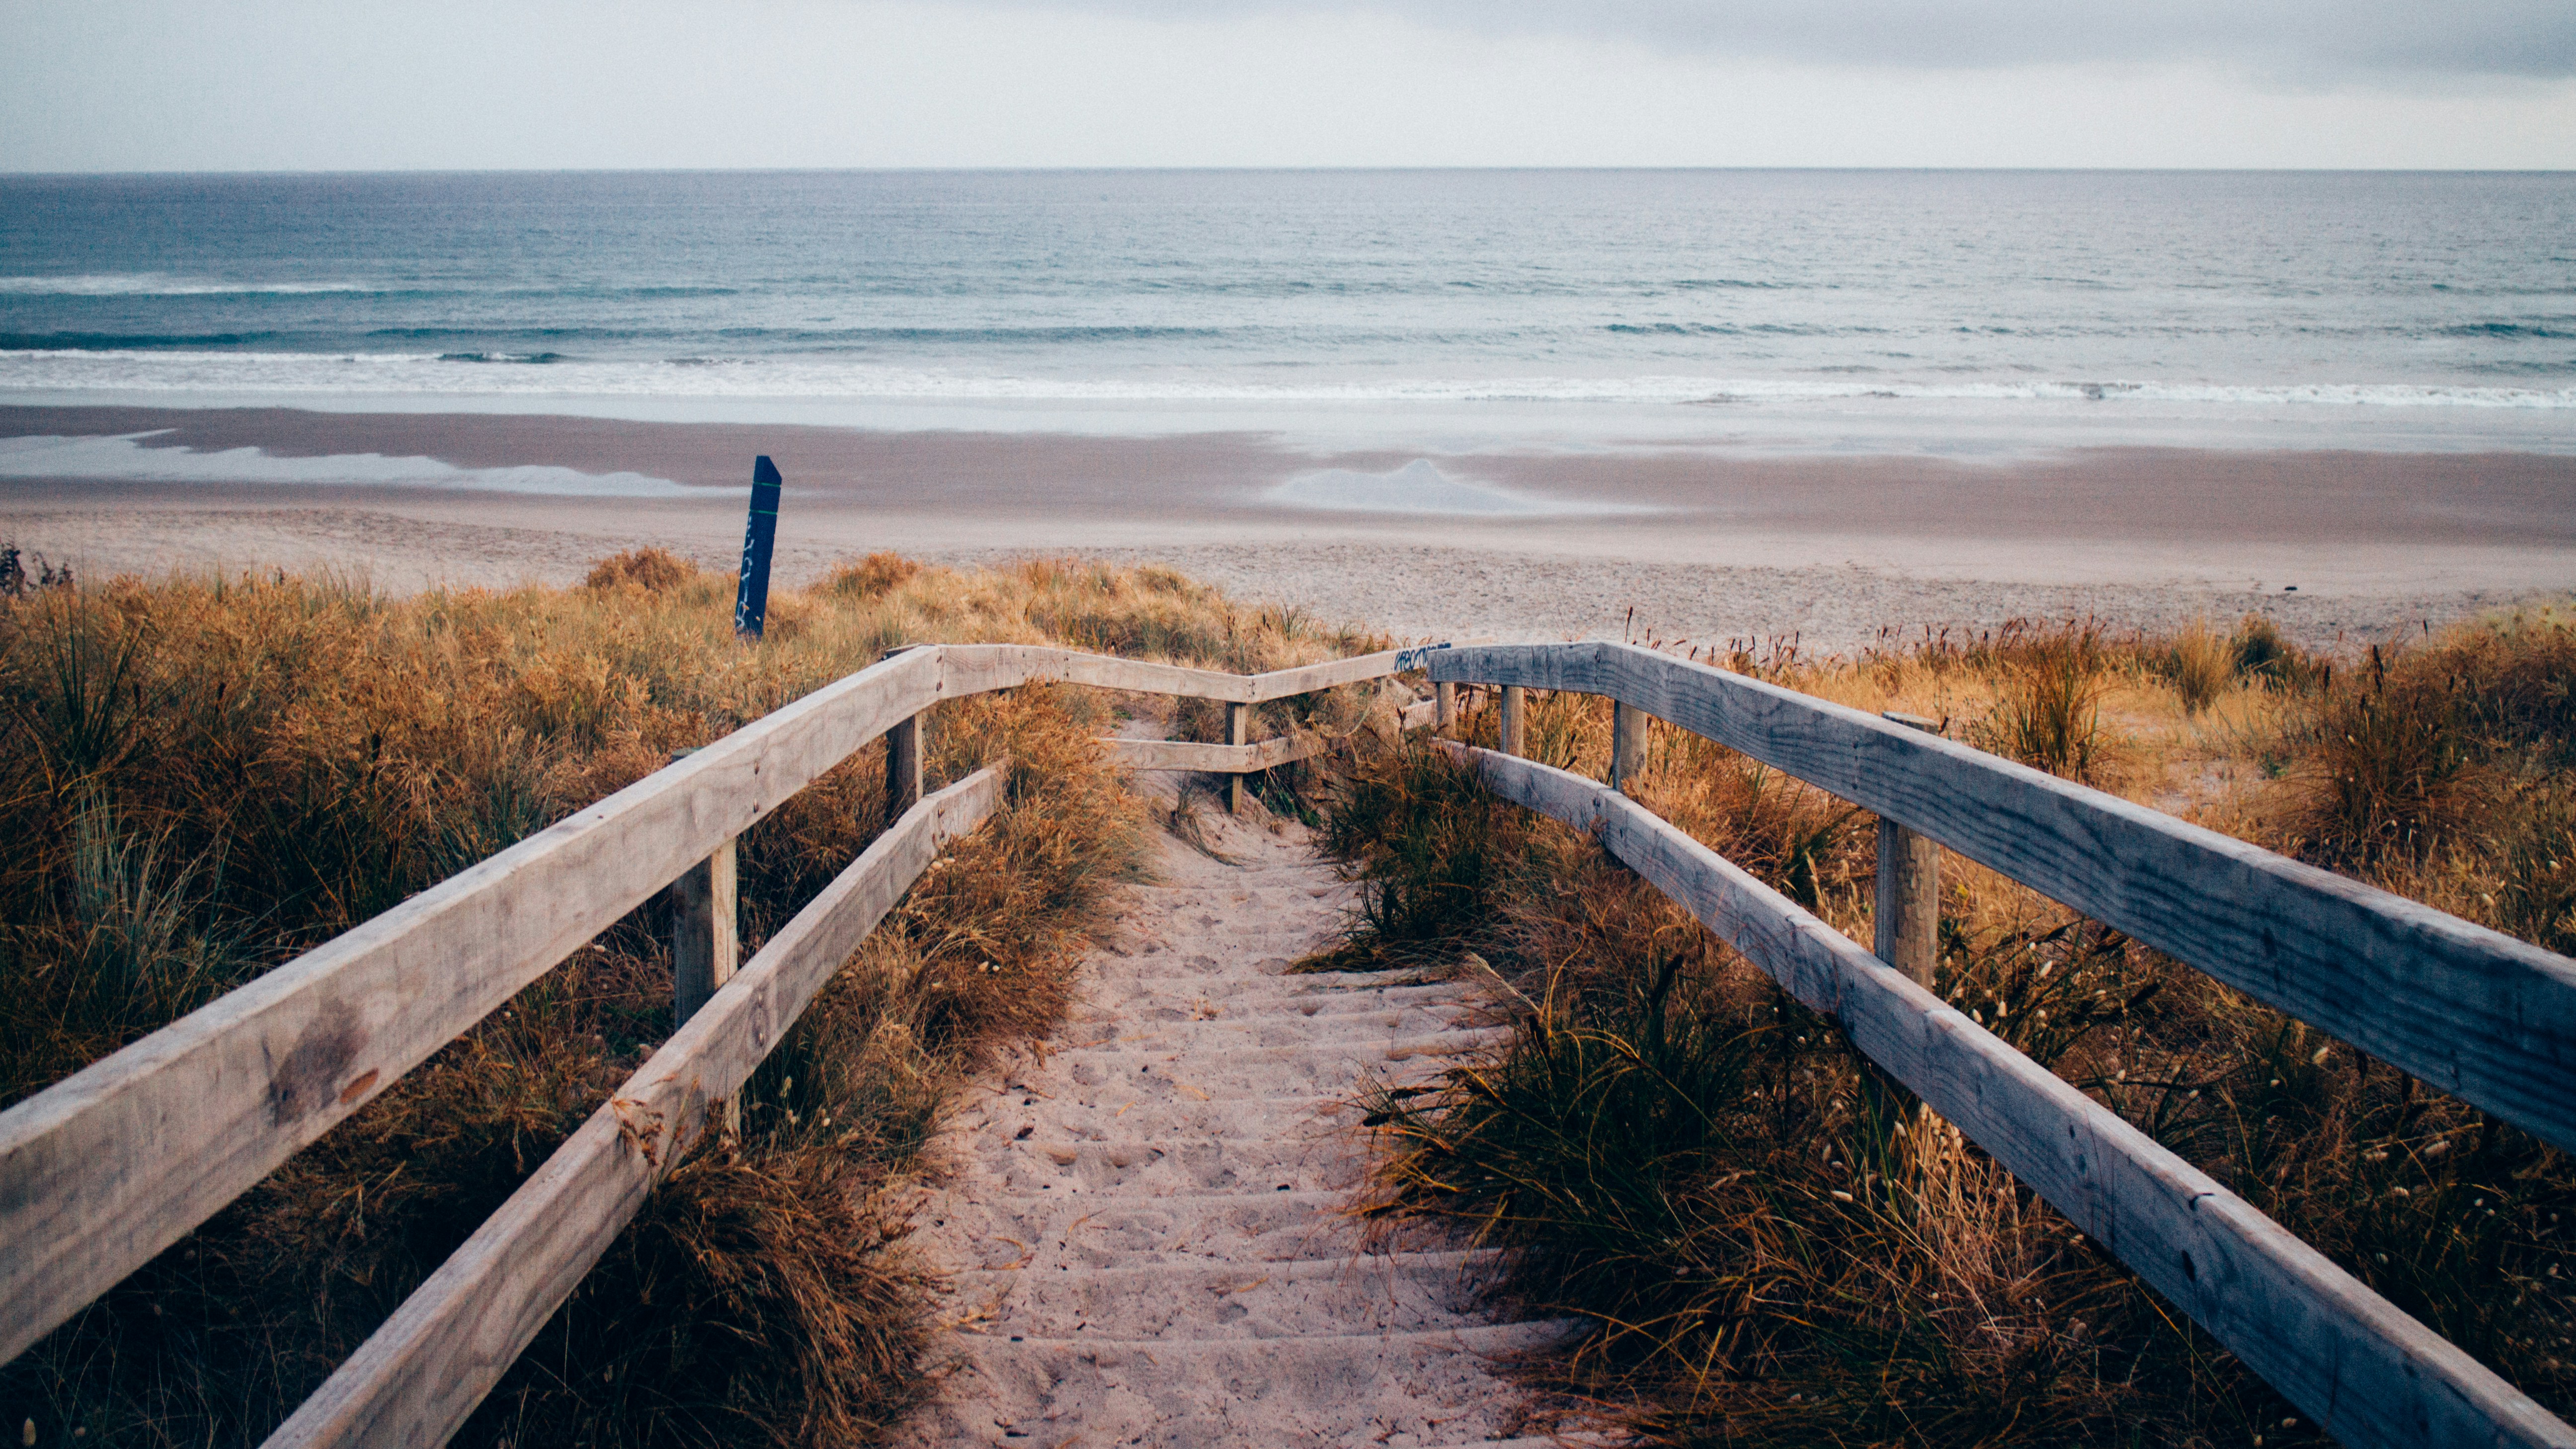 Choose from a curated selection of beach photos. Always free on Unsplash.